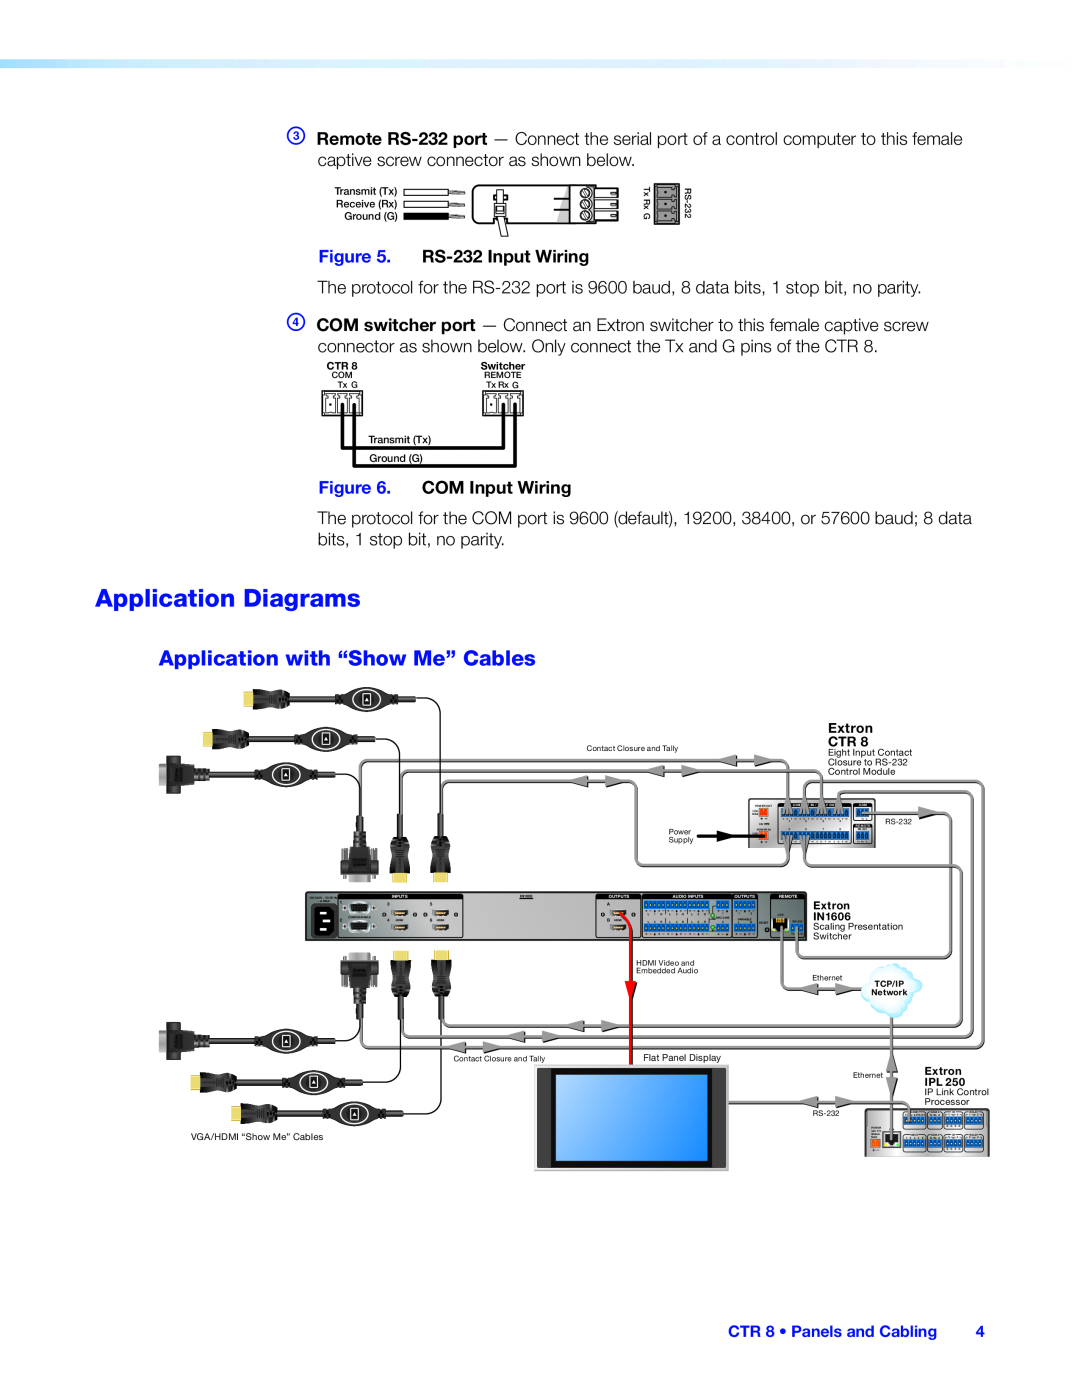 Extron electronic CTR 8 manual Application Diagrams, Application with “Show Me” Cables 